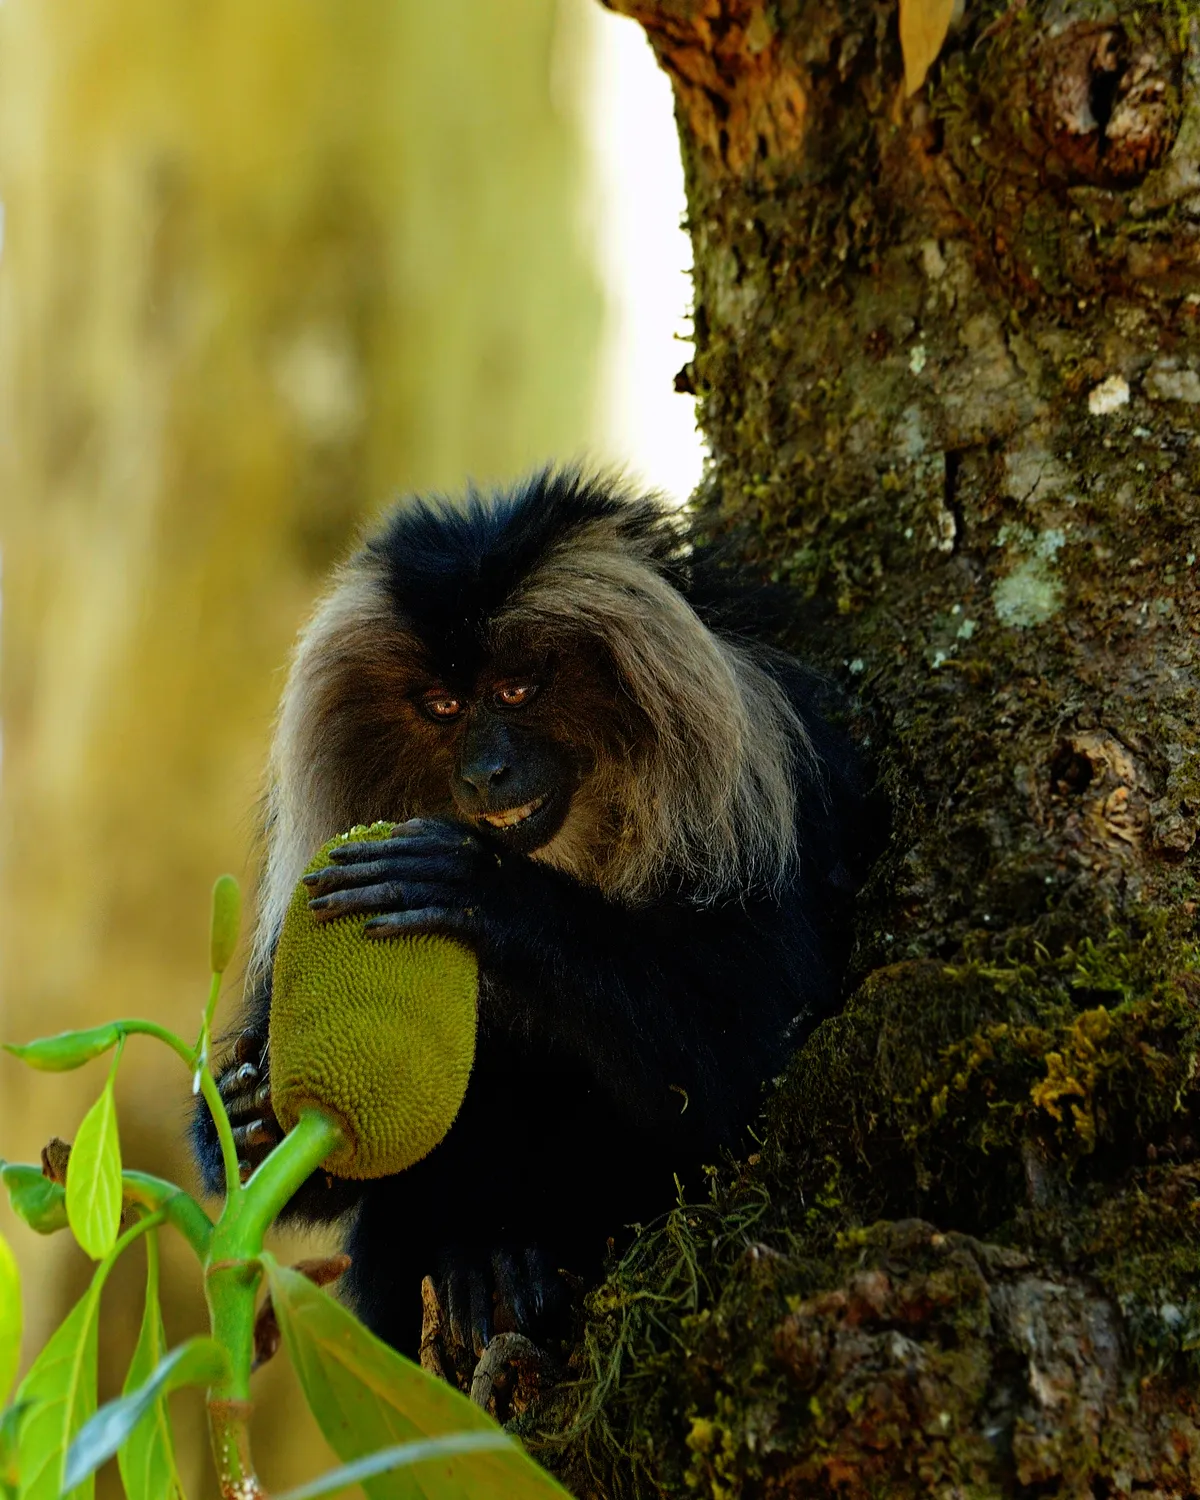 I was following a group of lion-tailed macaques which are rainforest dwellers and love jackfruit. As soon as this one got a jackfruit, its eyes seemed to glitter with a happy expression. © Rathika Ramasamy